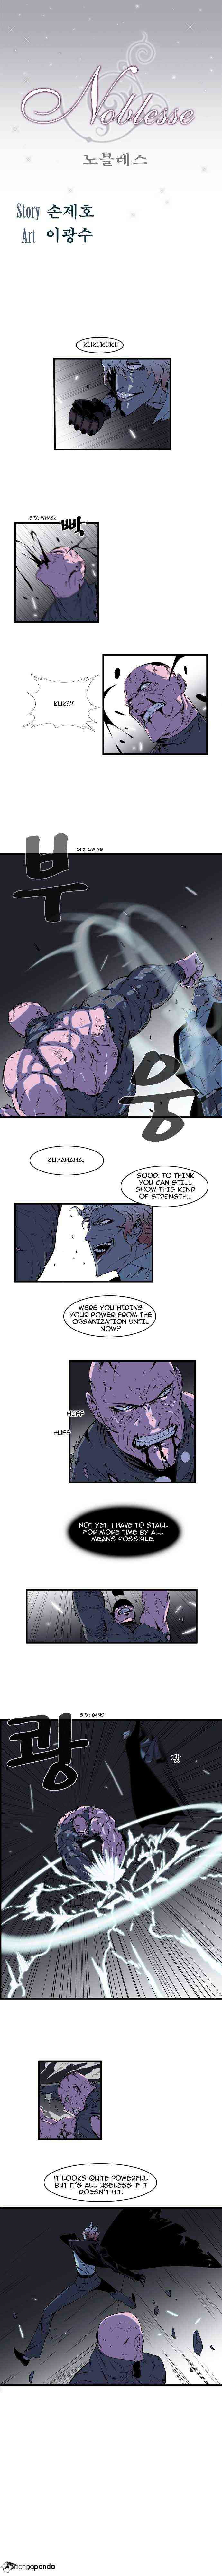 Noblesse Chapter 74 page 1